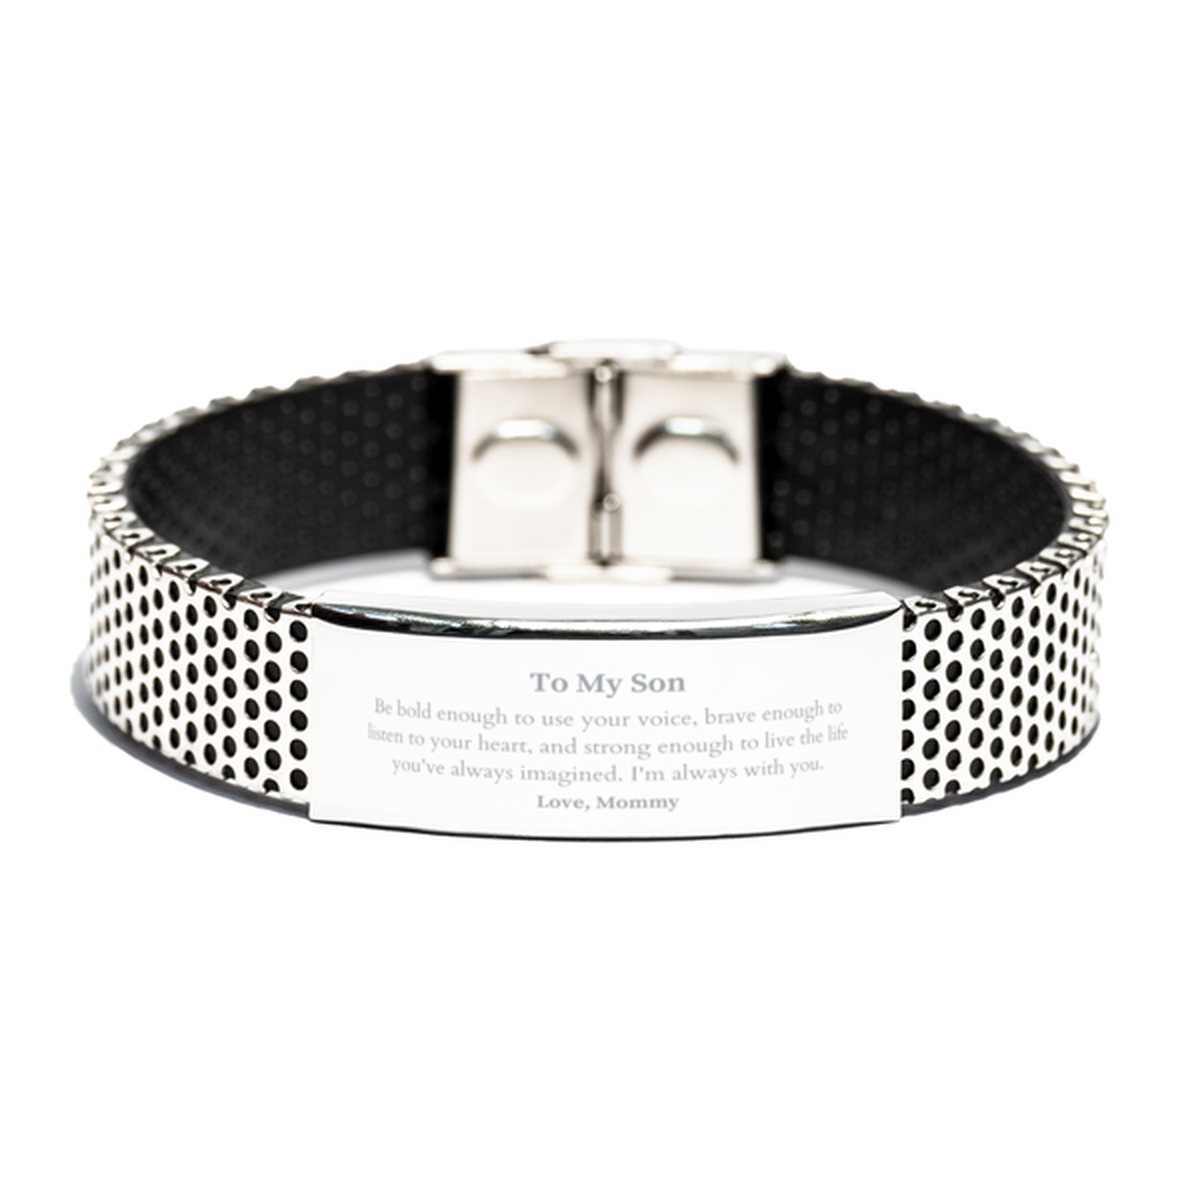 Keepsake Son Stainless Steel Bracelet Gift Idea Graduation Christmas Birthday Son from Mommy, Son Be bold enough to use your voice, brave enough to listen to your heart. Love, Mommy